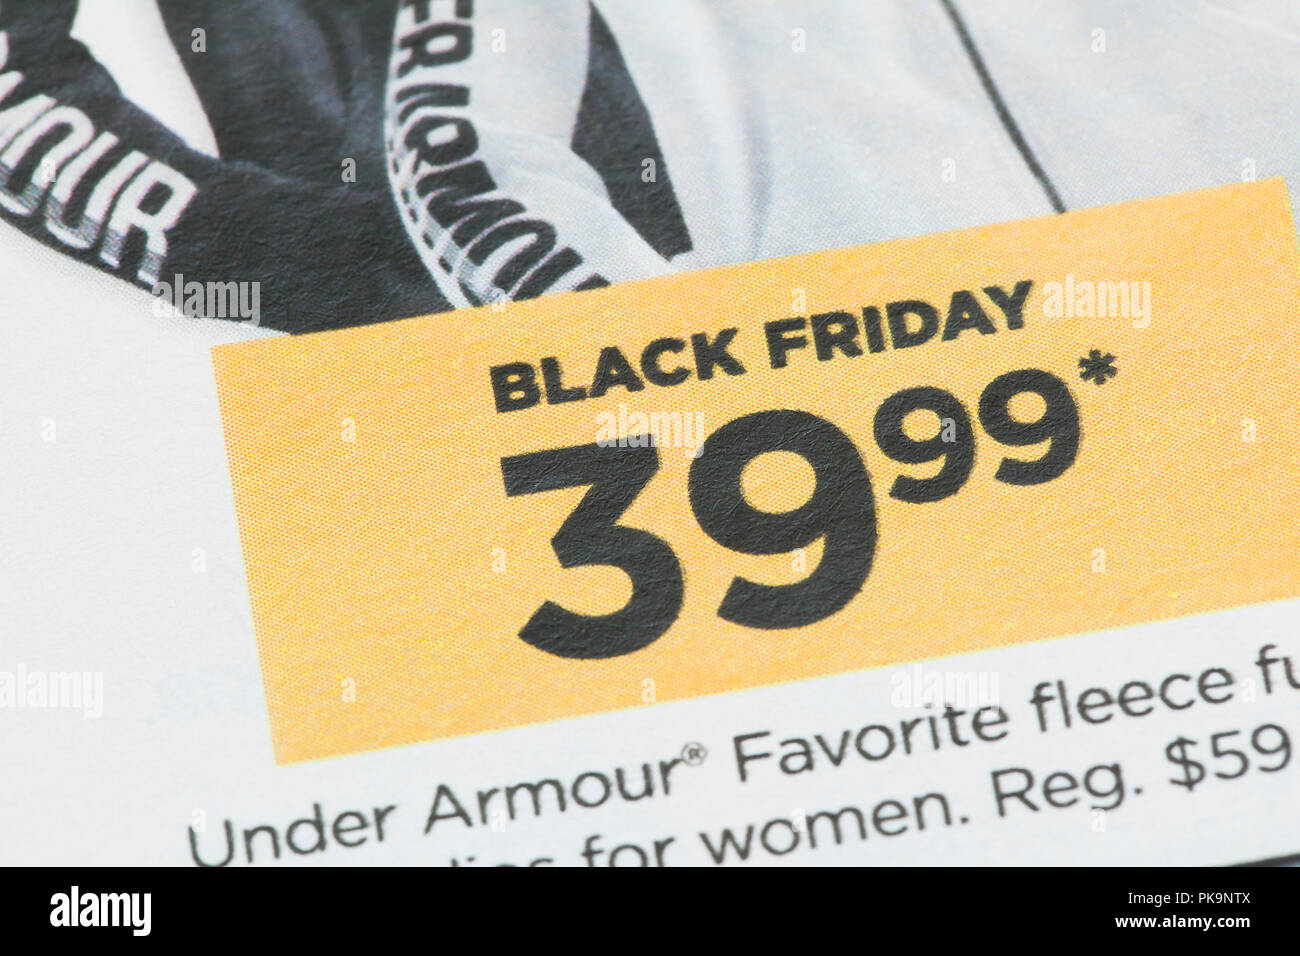 Black Friday sale ad on clothing in weekly mailer - USA Stock Photo